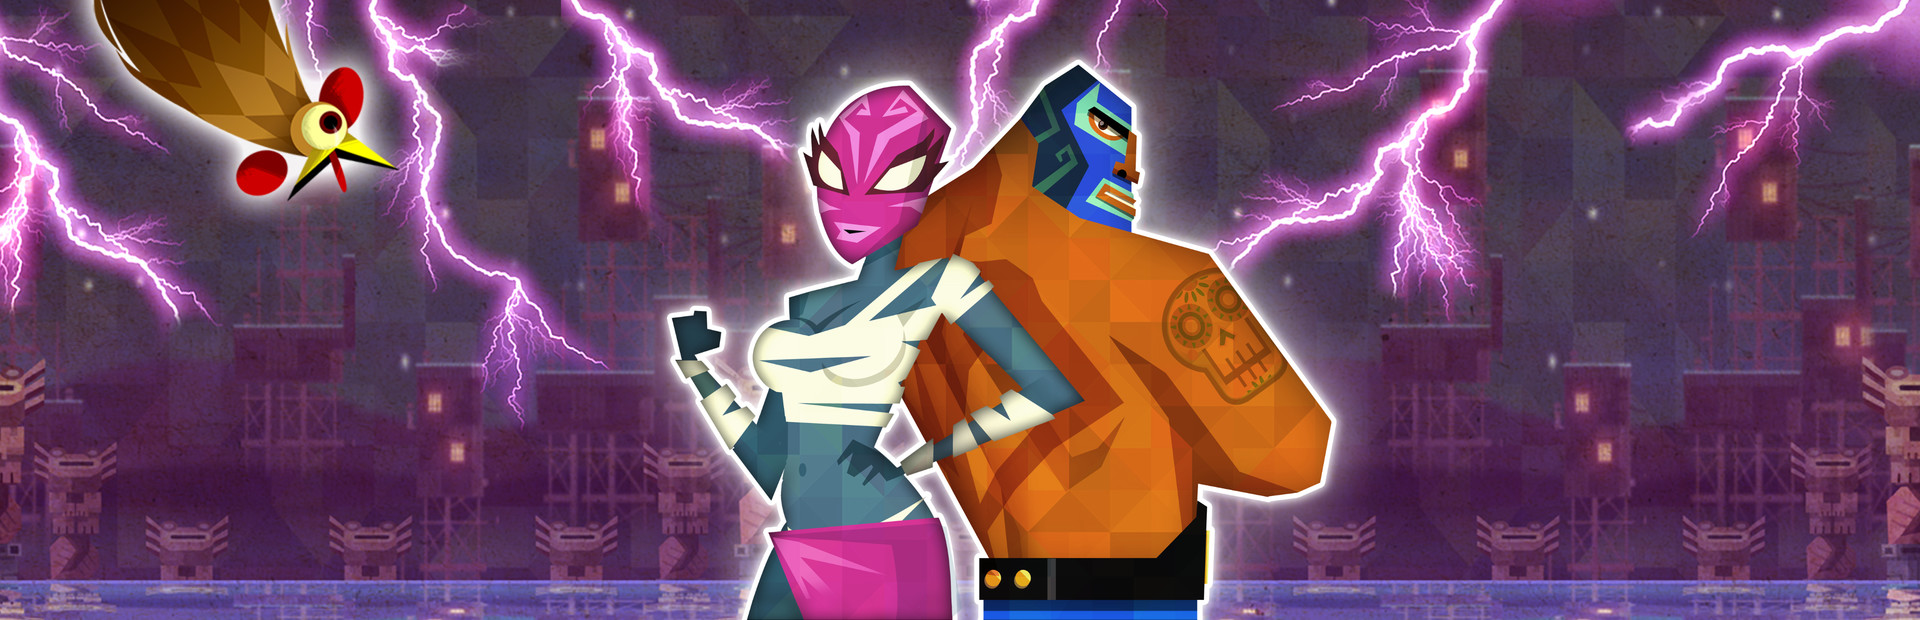 Guacamelee! Super Turbo Championship Edition cover image